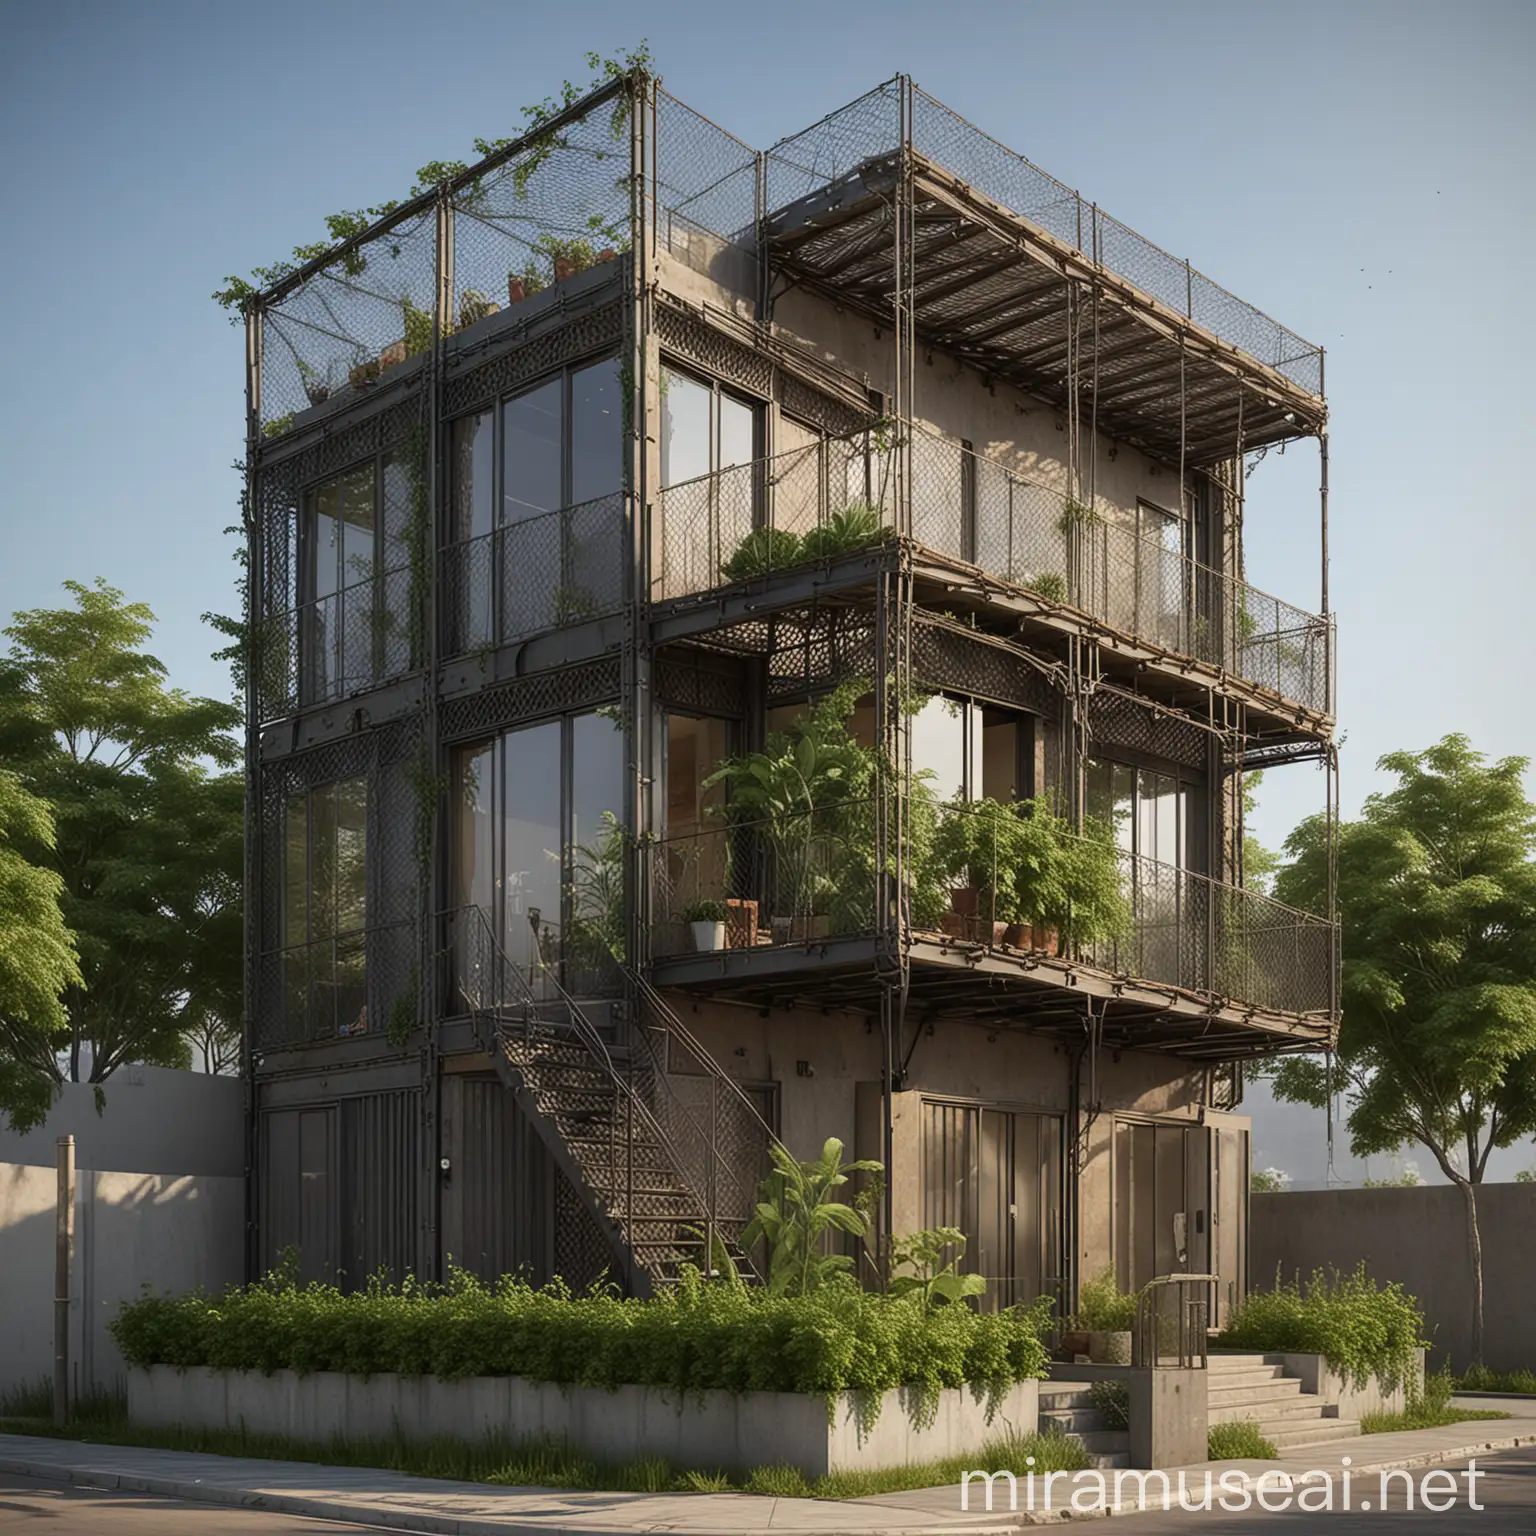 Modern EcoFriendly Steel Mesh Villa with Climbing Plants and Cargo Containers